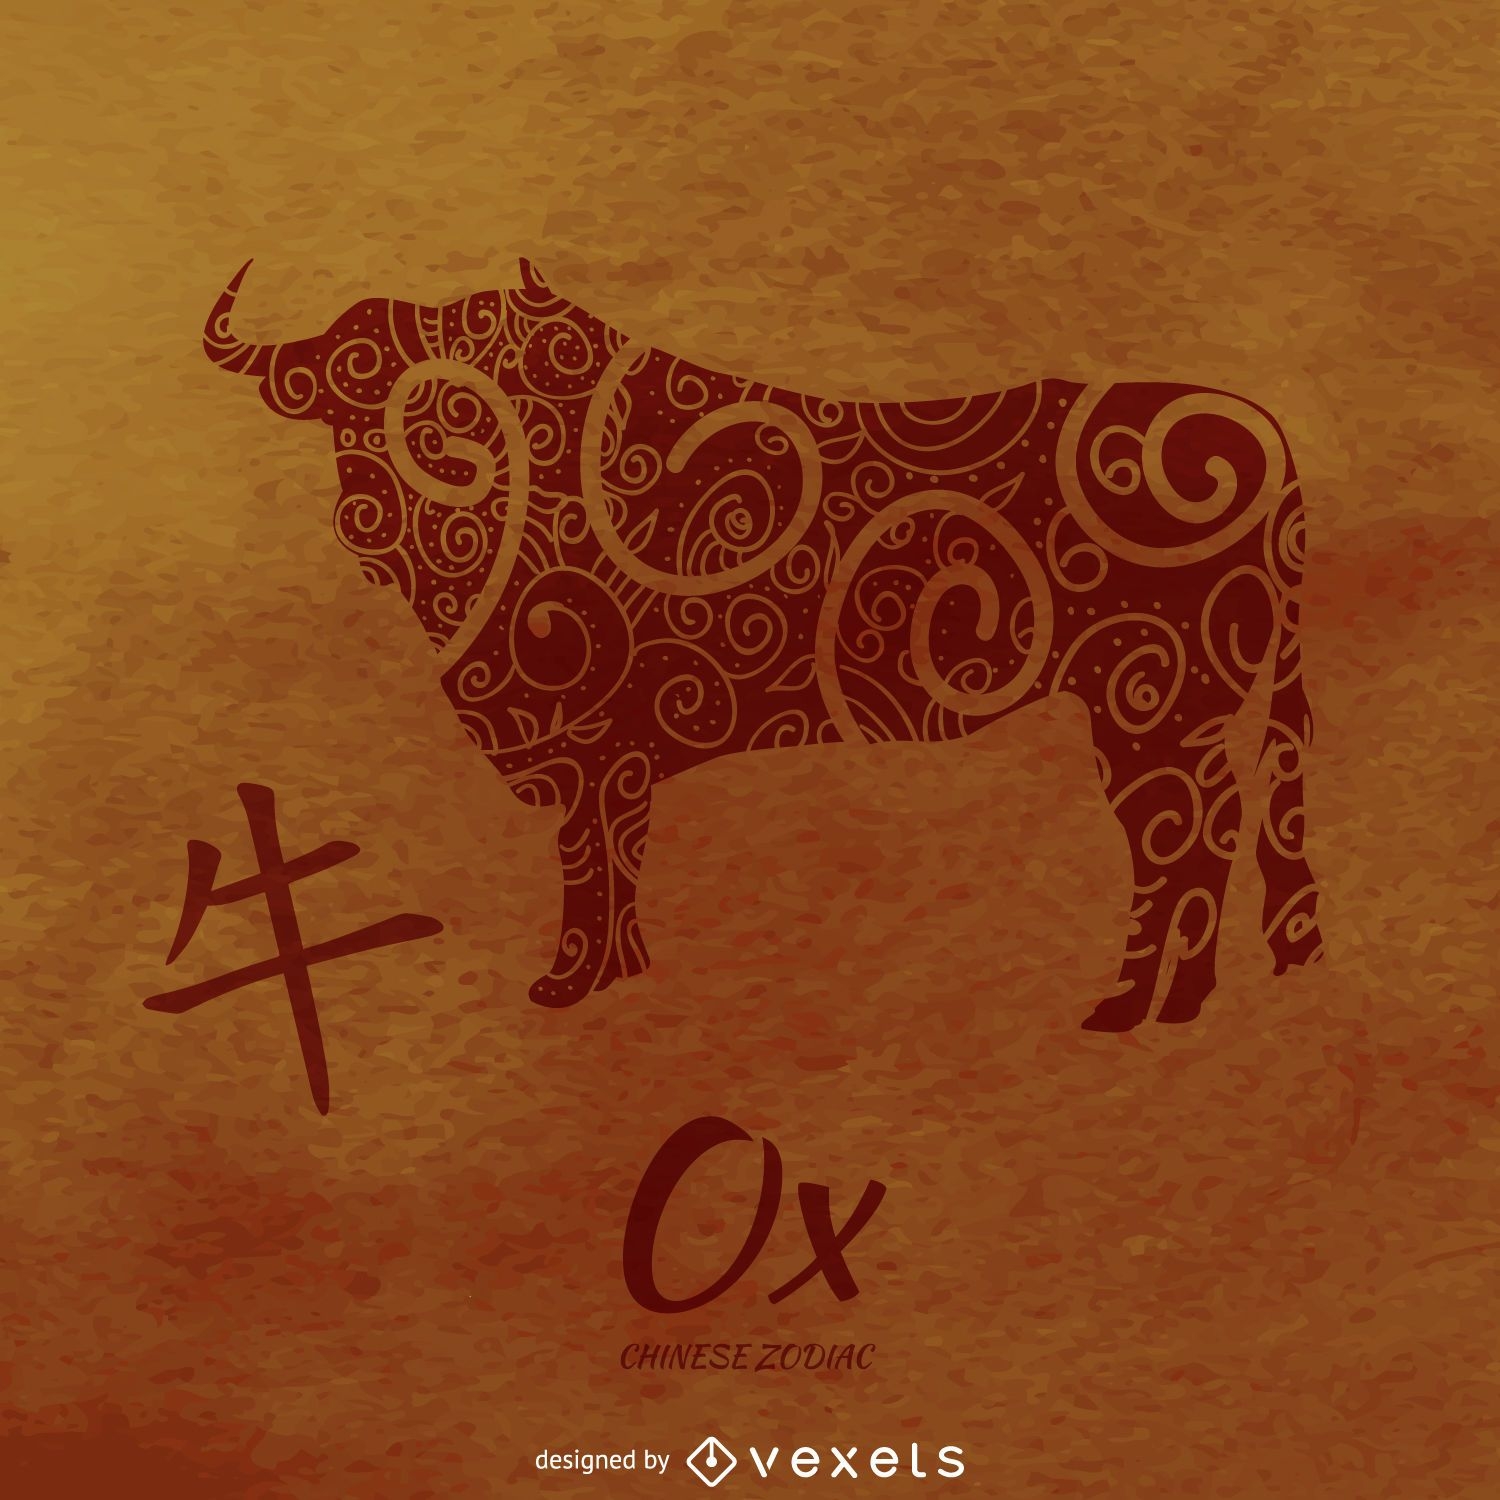 Chinese Zodiac Tattoo Ox by visuallyours on DeviantArt